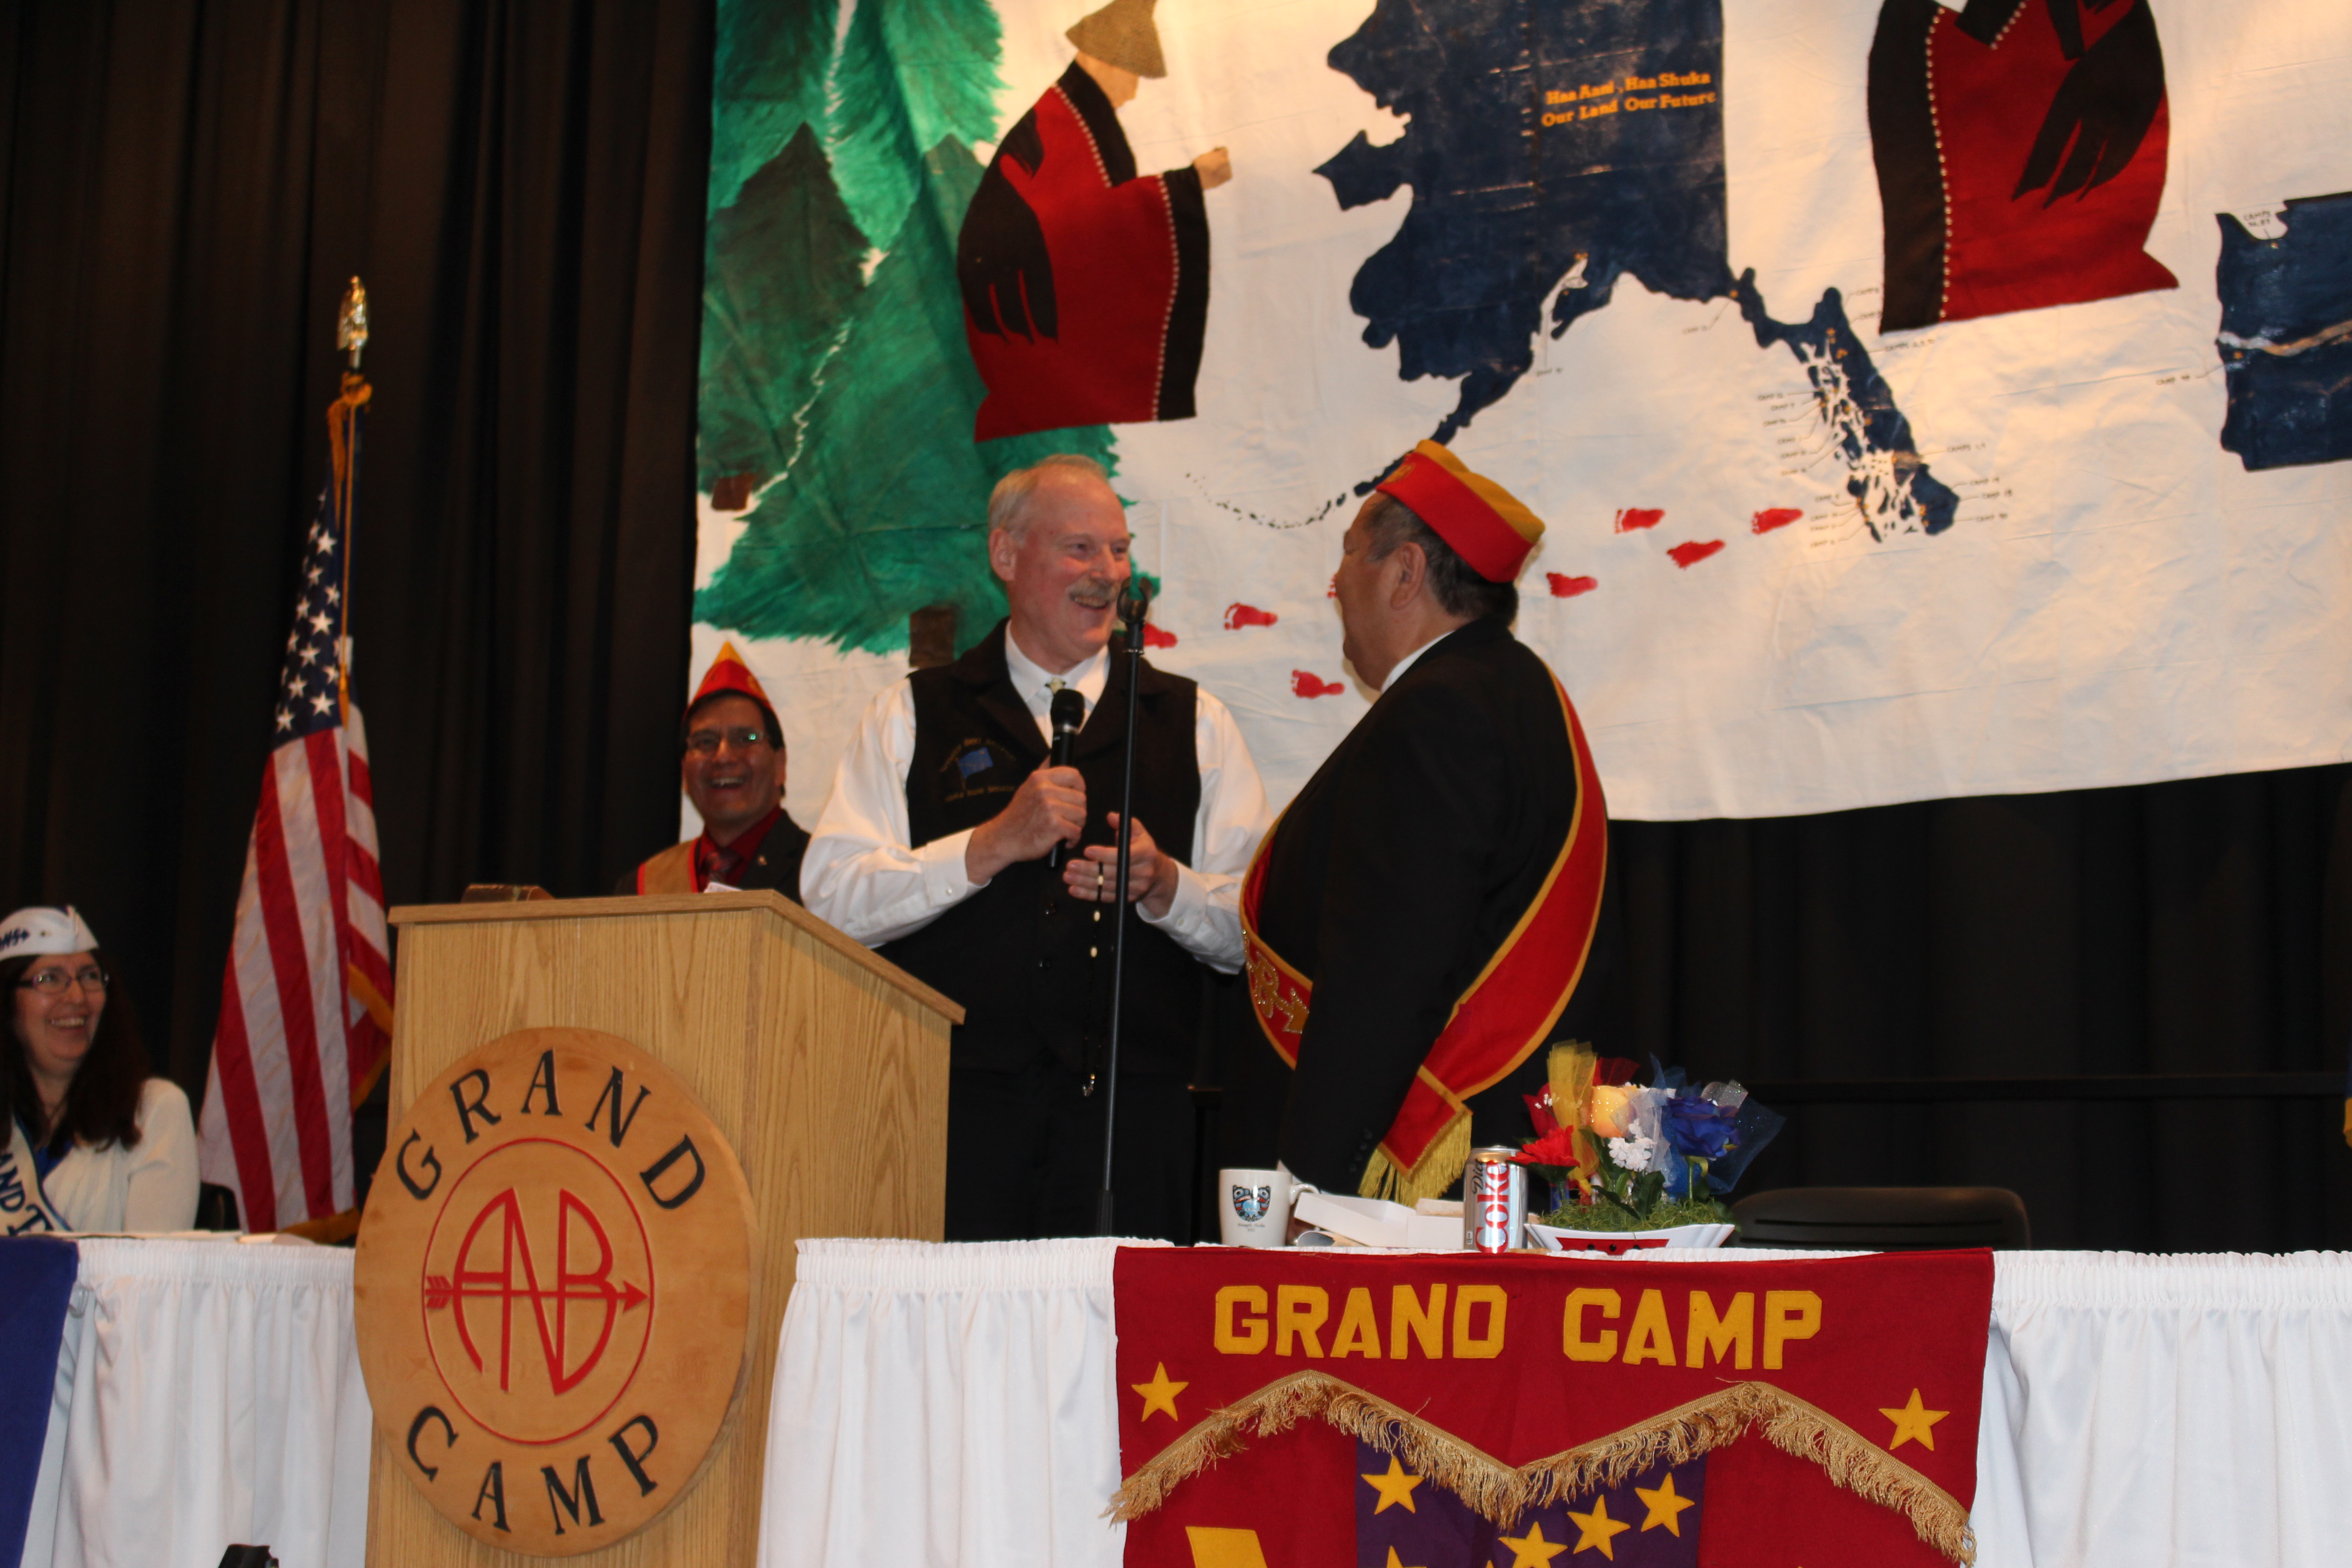 Senator Stedman pictured with Brother Wes Morrison during the ANB/ANS Grand Camp Convention.